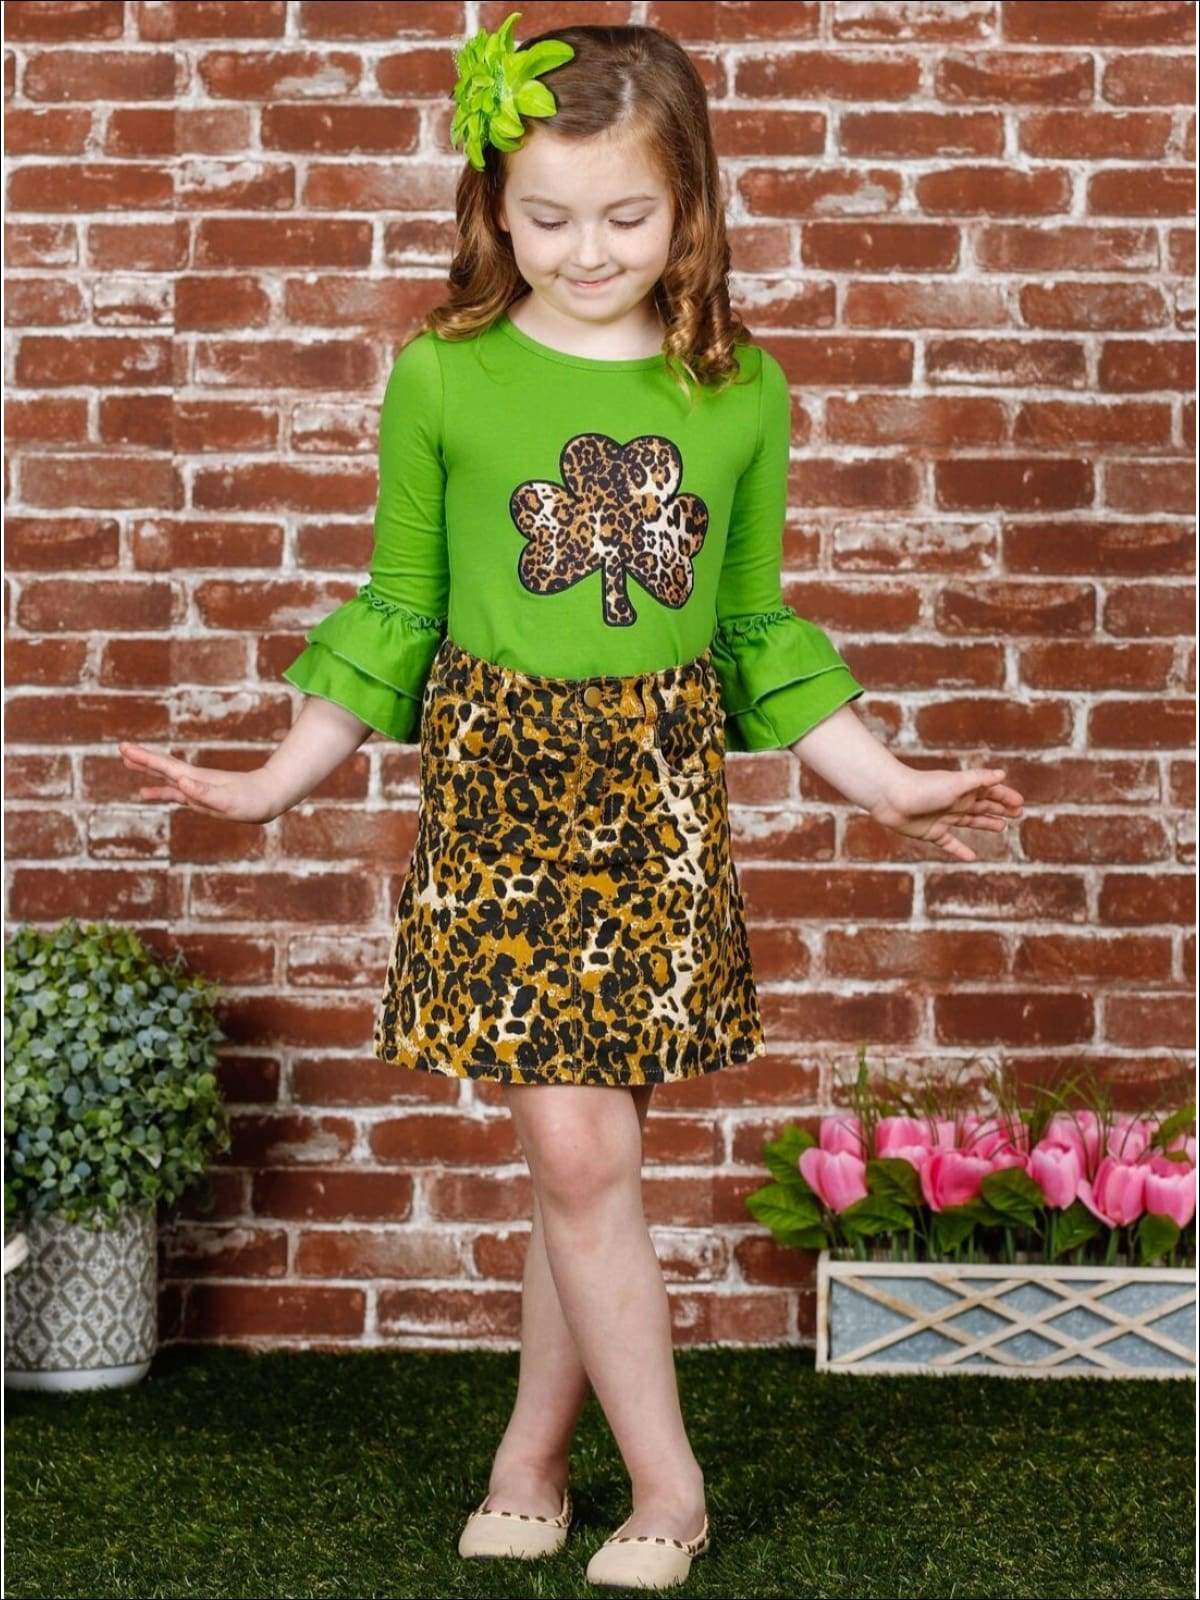 Mia Belle Girls St. Patrick's Day Clover Top And Leopard Skirt Set